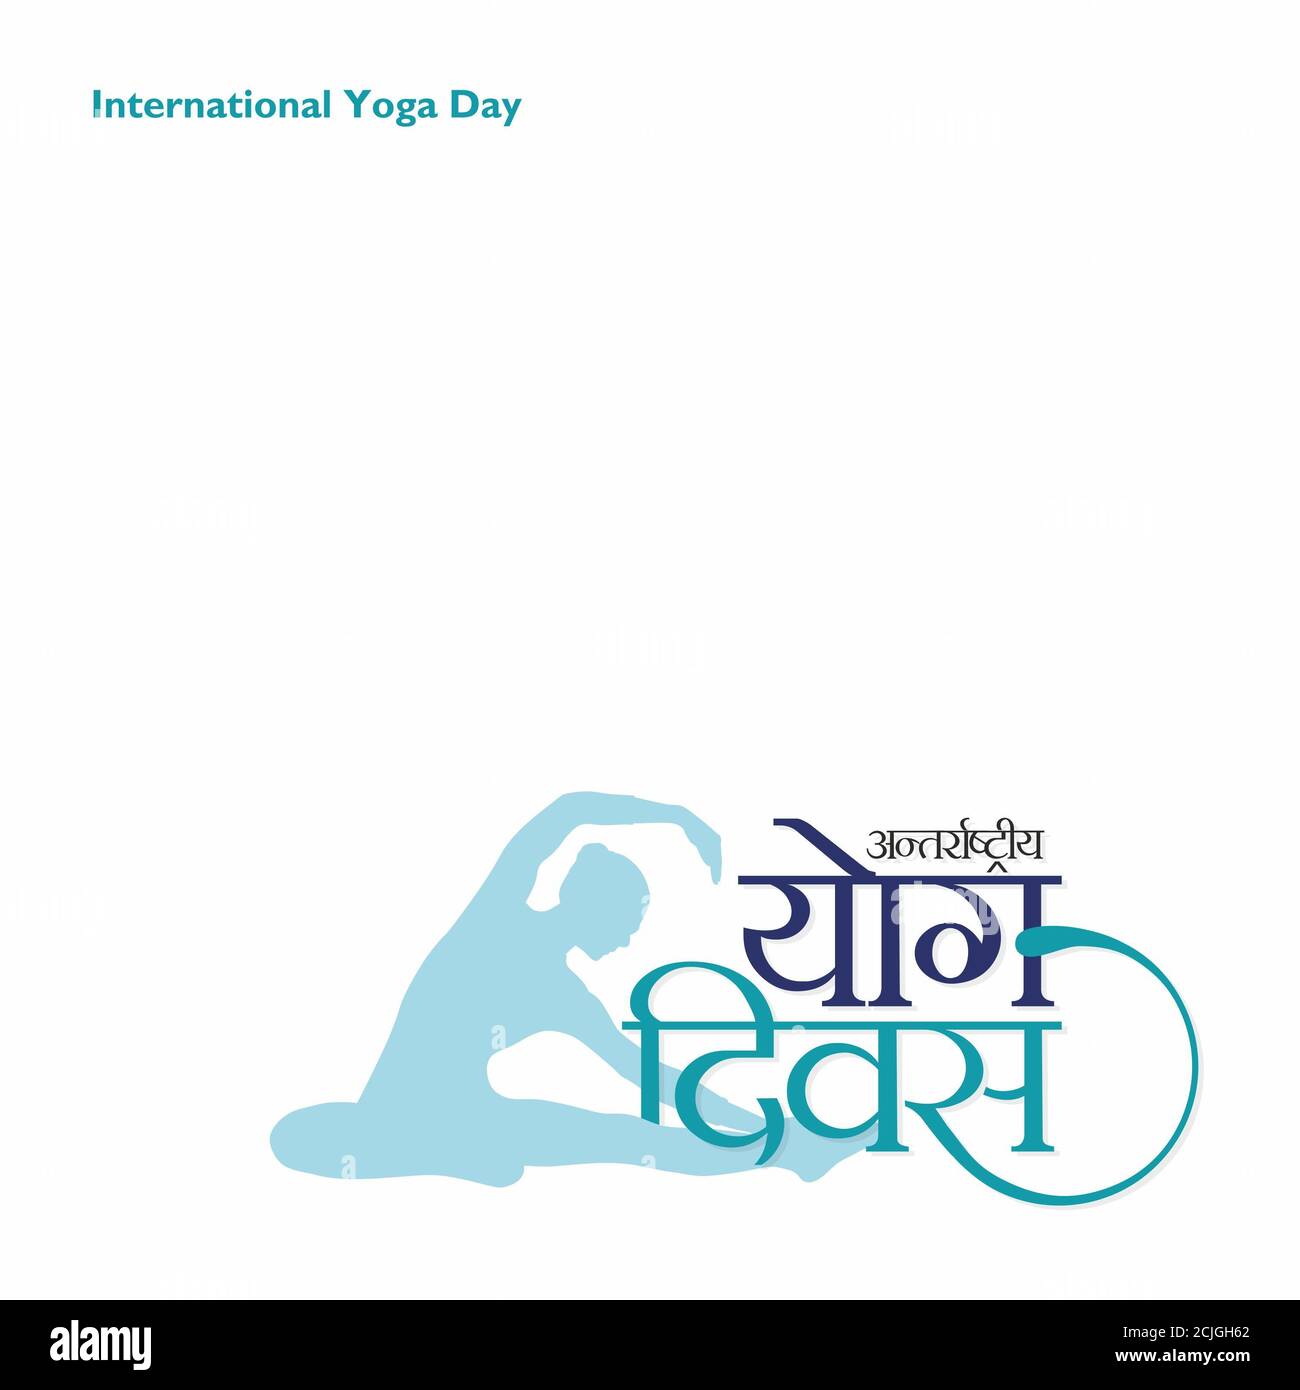 Wold Yoga Day Template | Happy Yoga Day Stock Photo